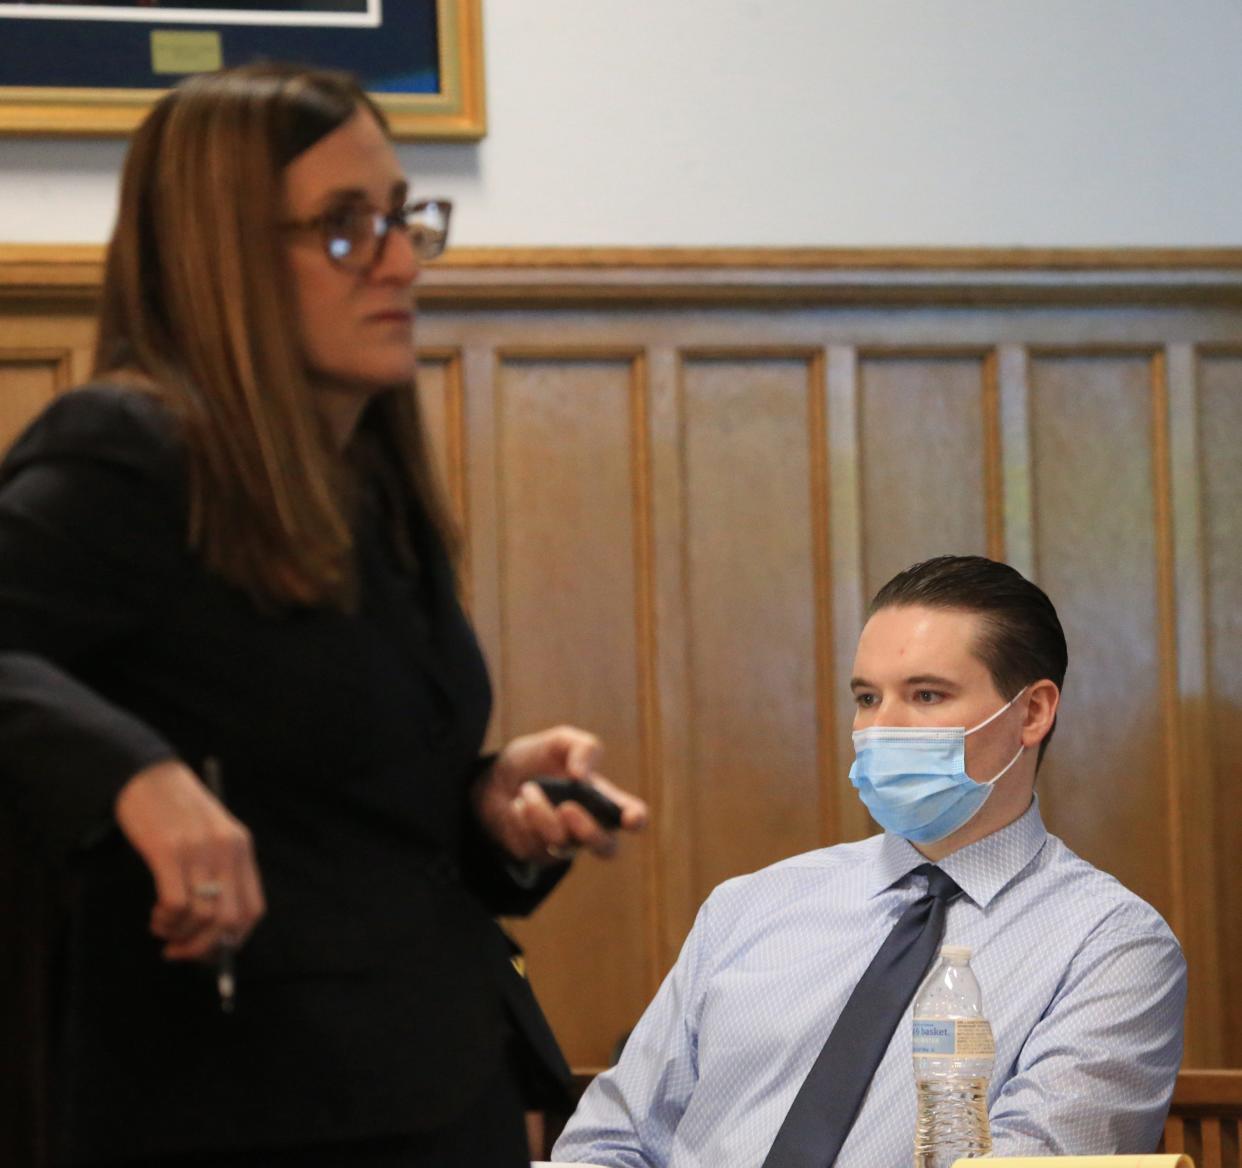 Assistant District Attorney Kristine Whelan makes her closing arguments during a trial at Dutchess County Court in the City of Poughkeepsie on April 28, 2021.